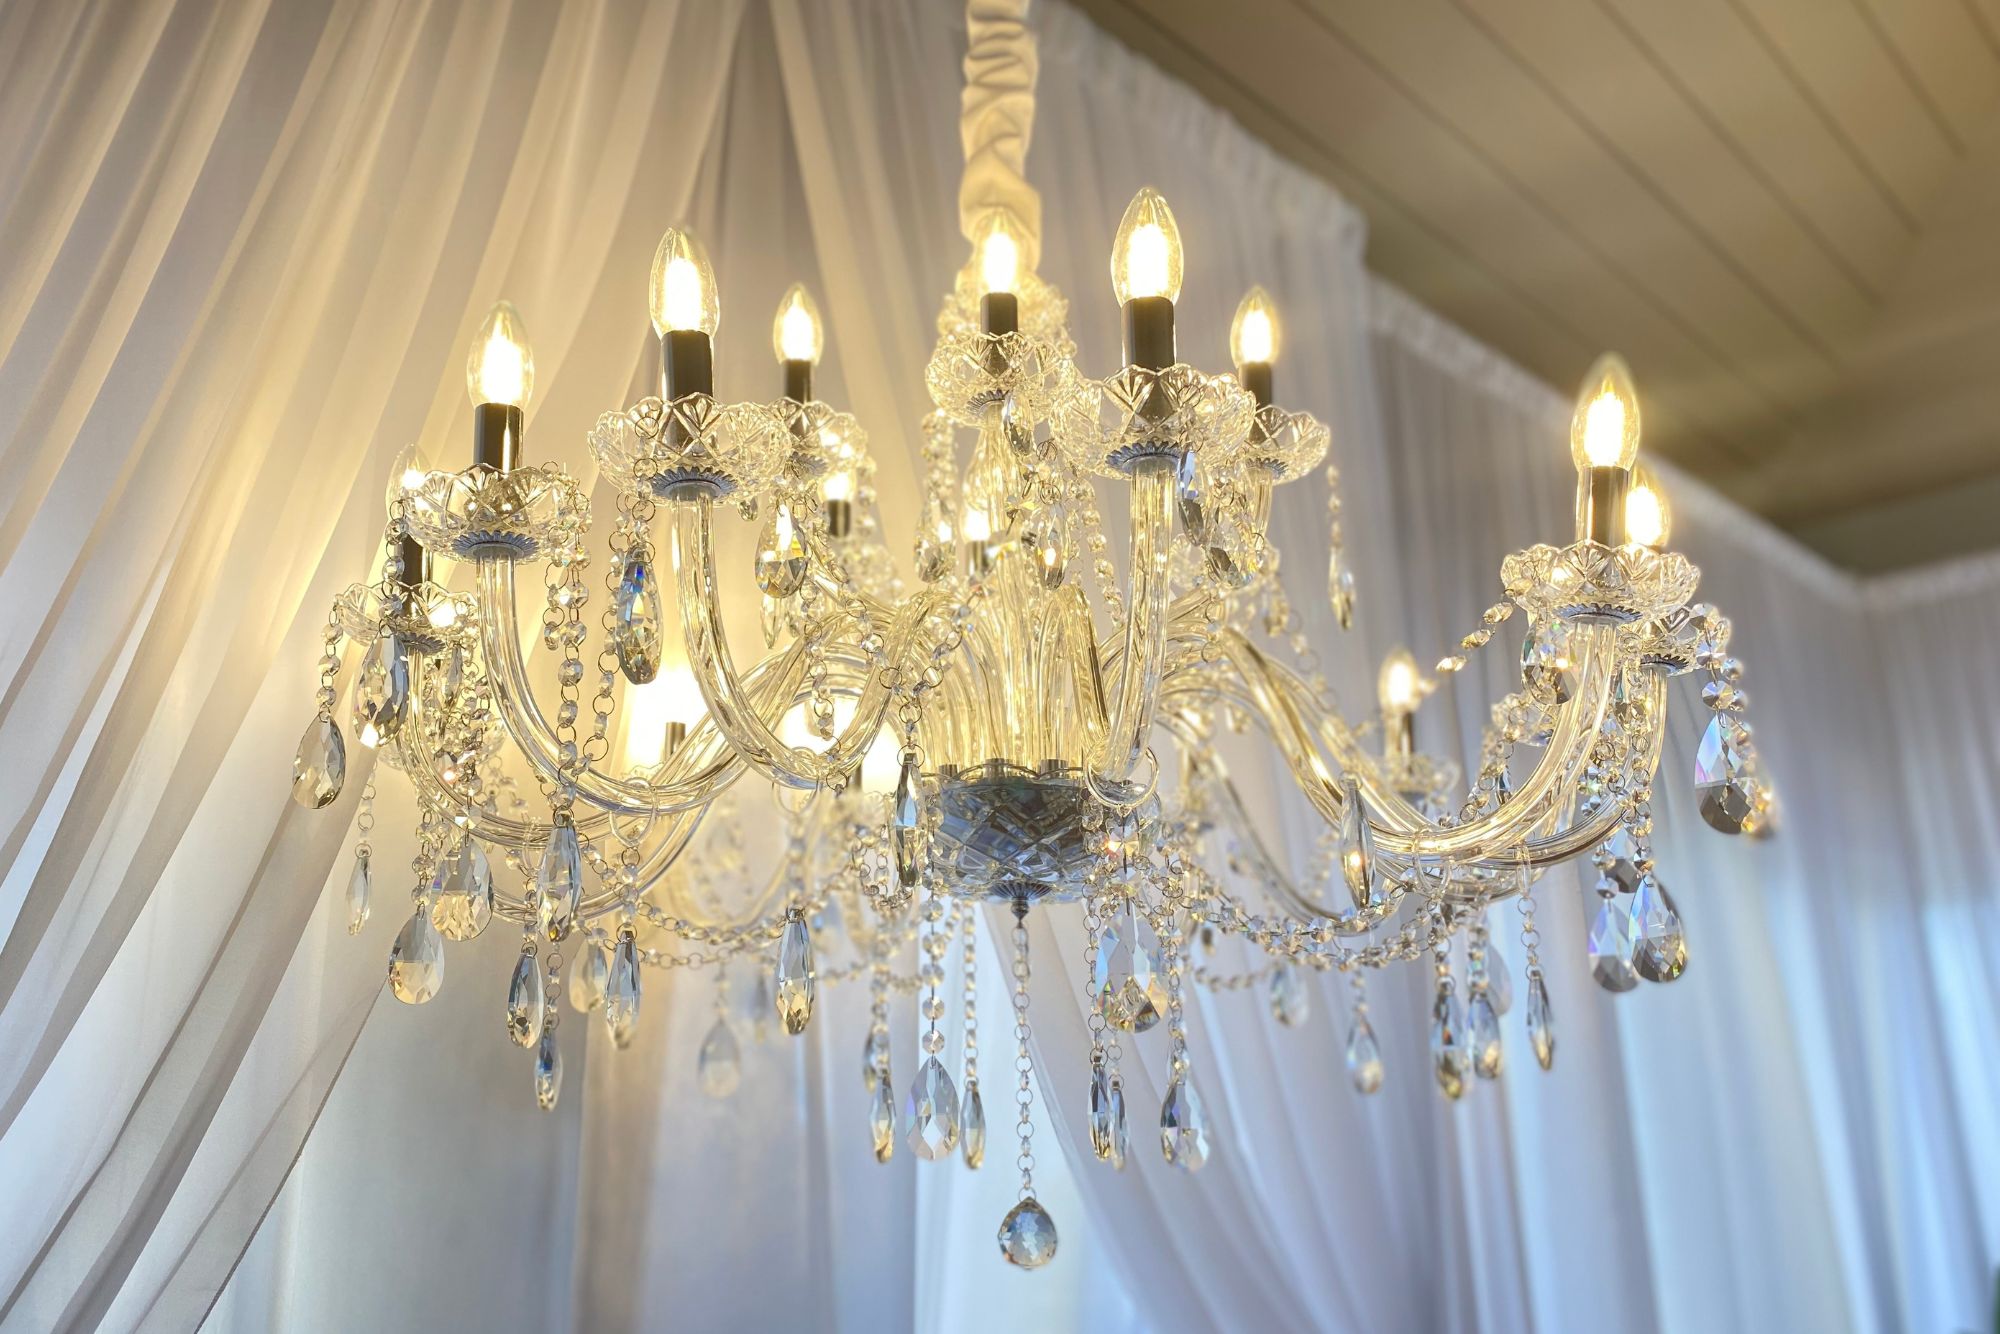 Illuminate Your Space with a Crystal Chandelier